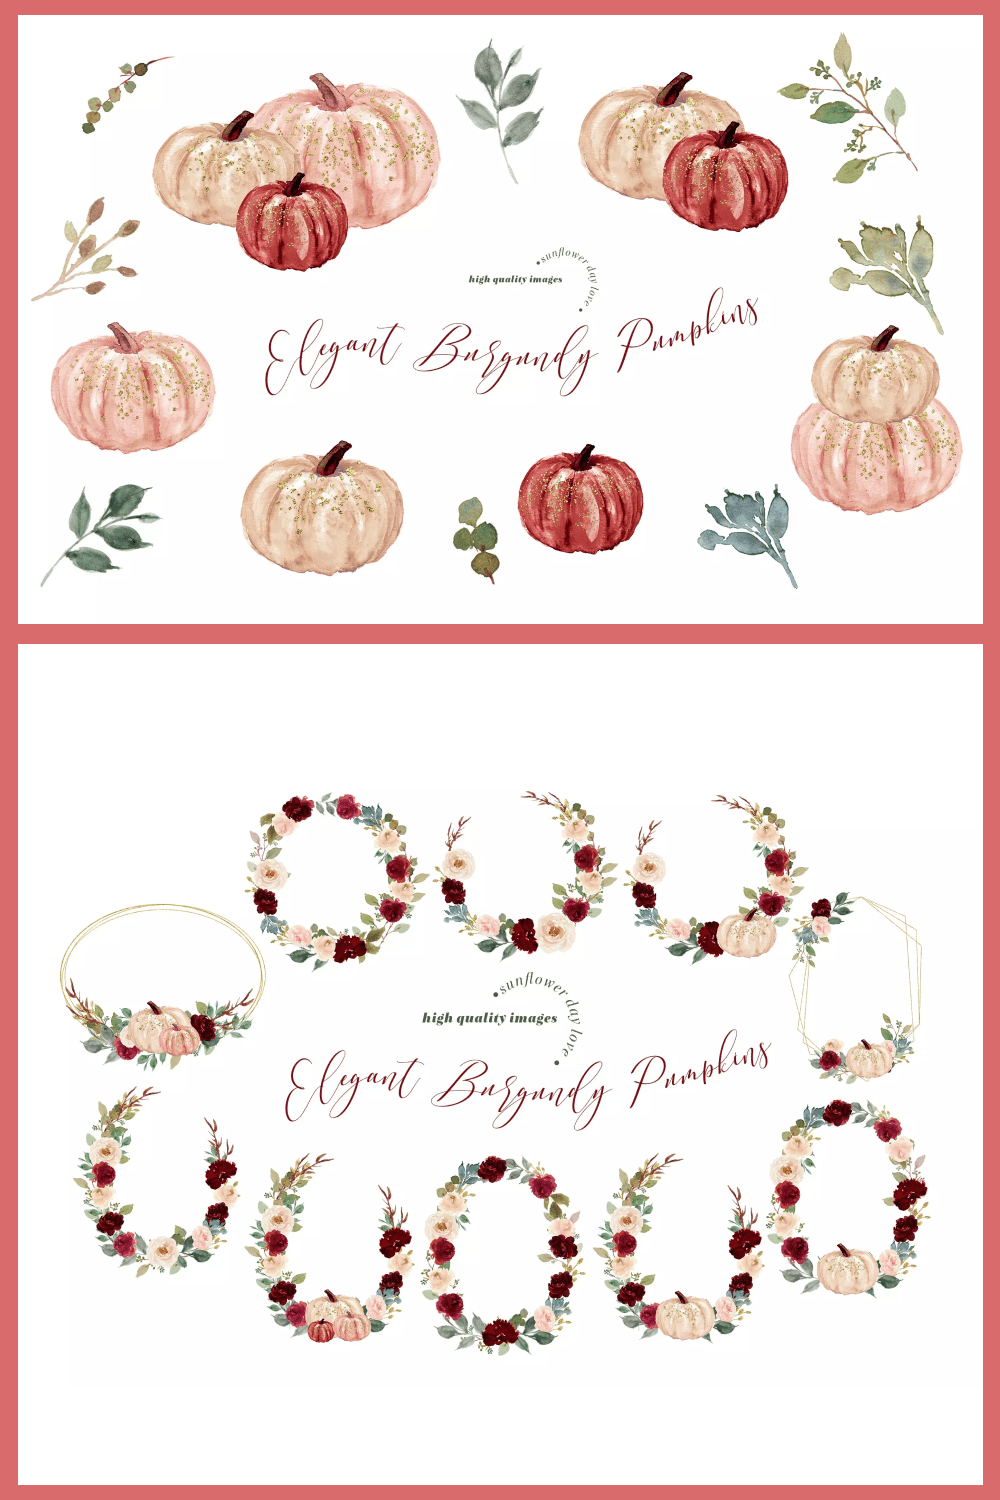 Collage with pumpkins in beige and red color with twigs and wreaths.